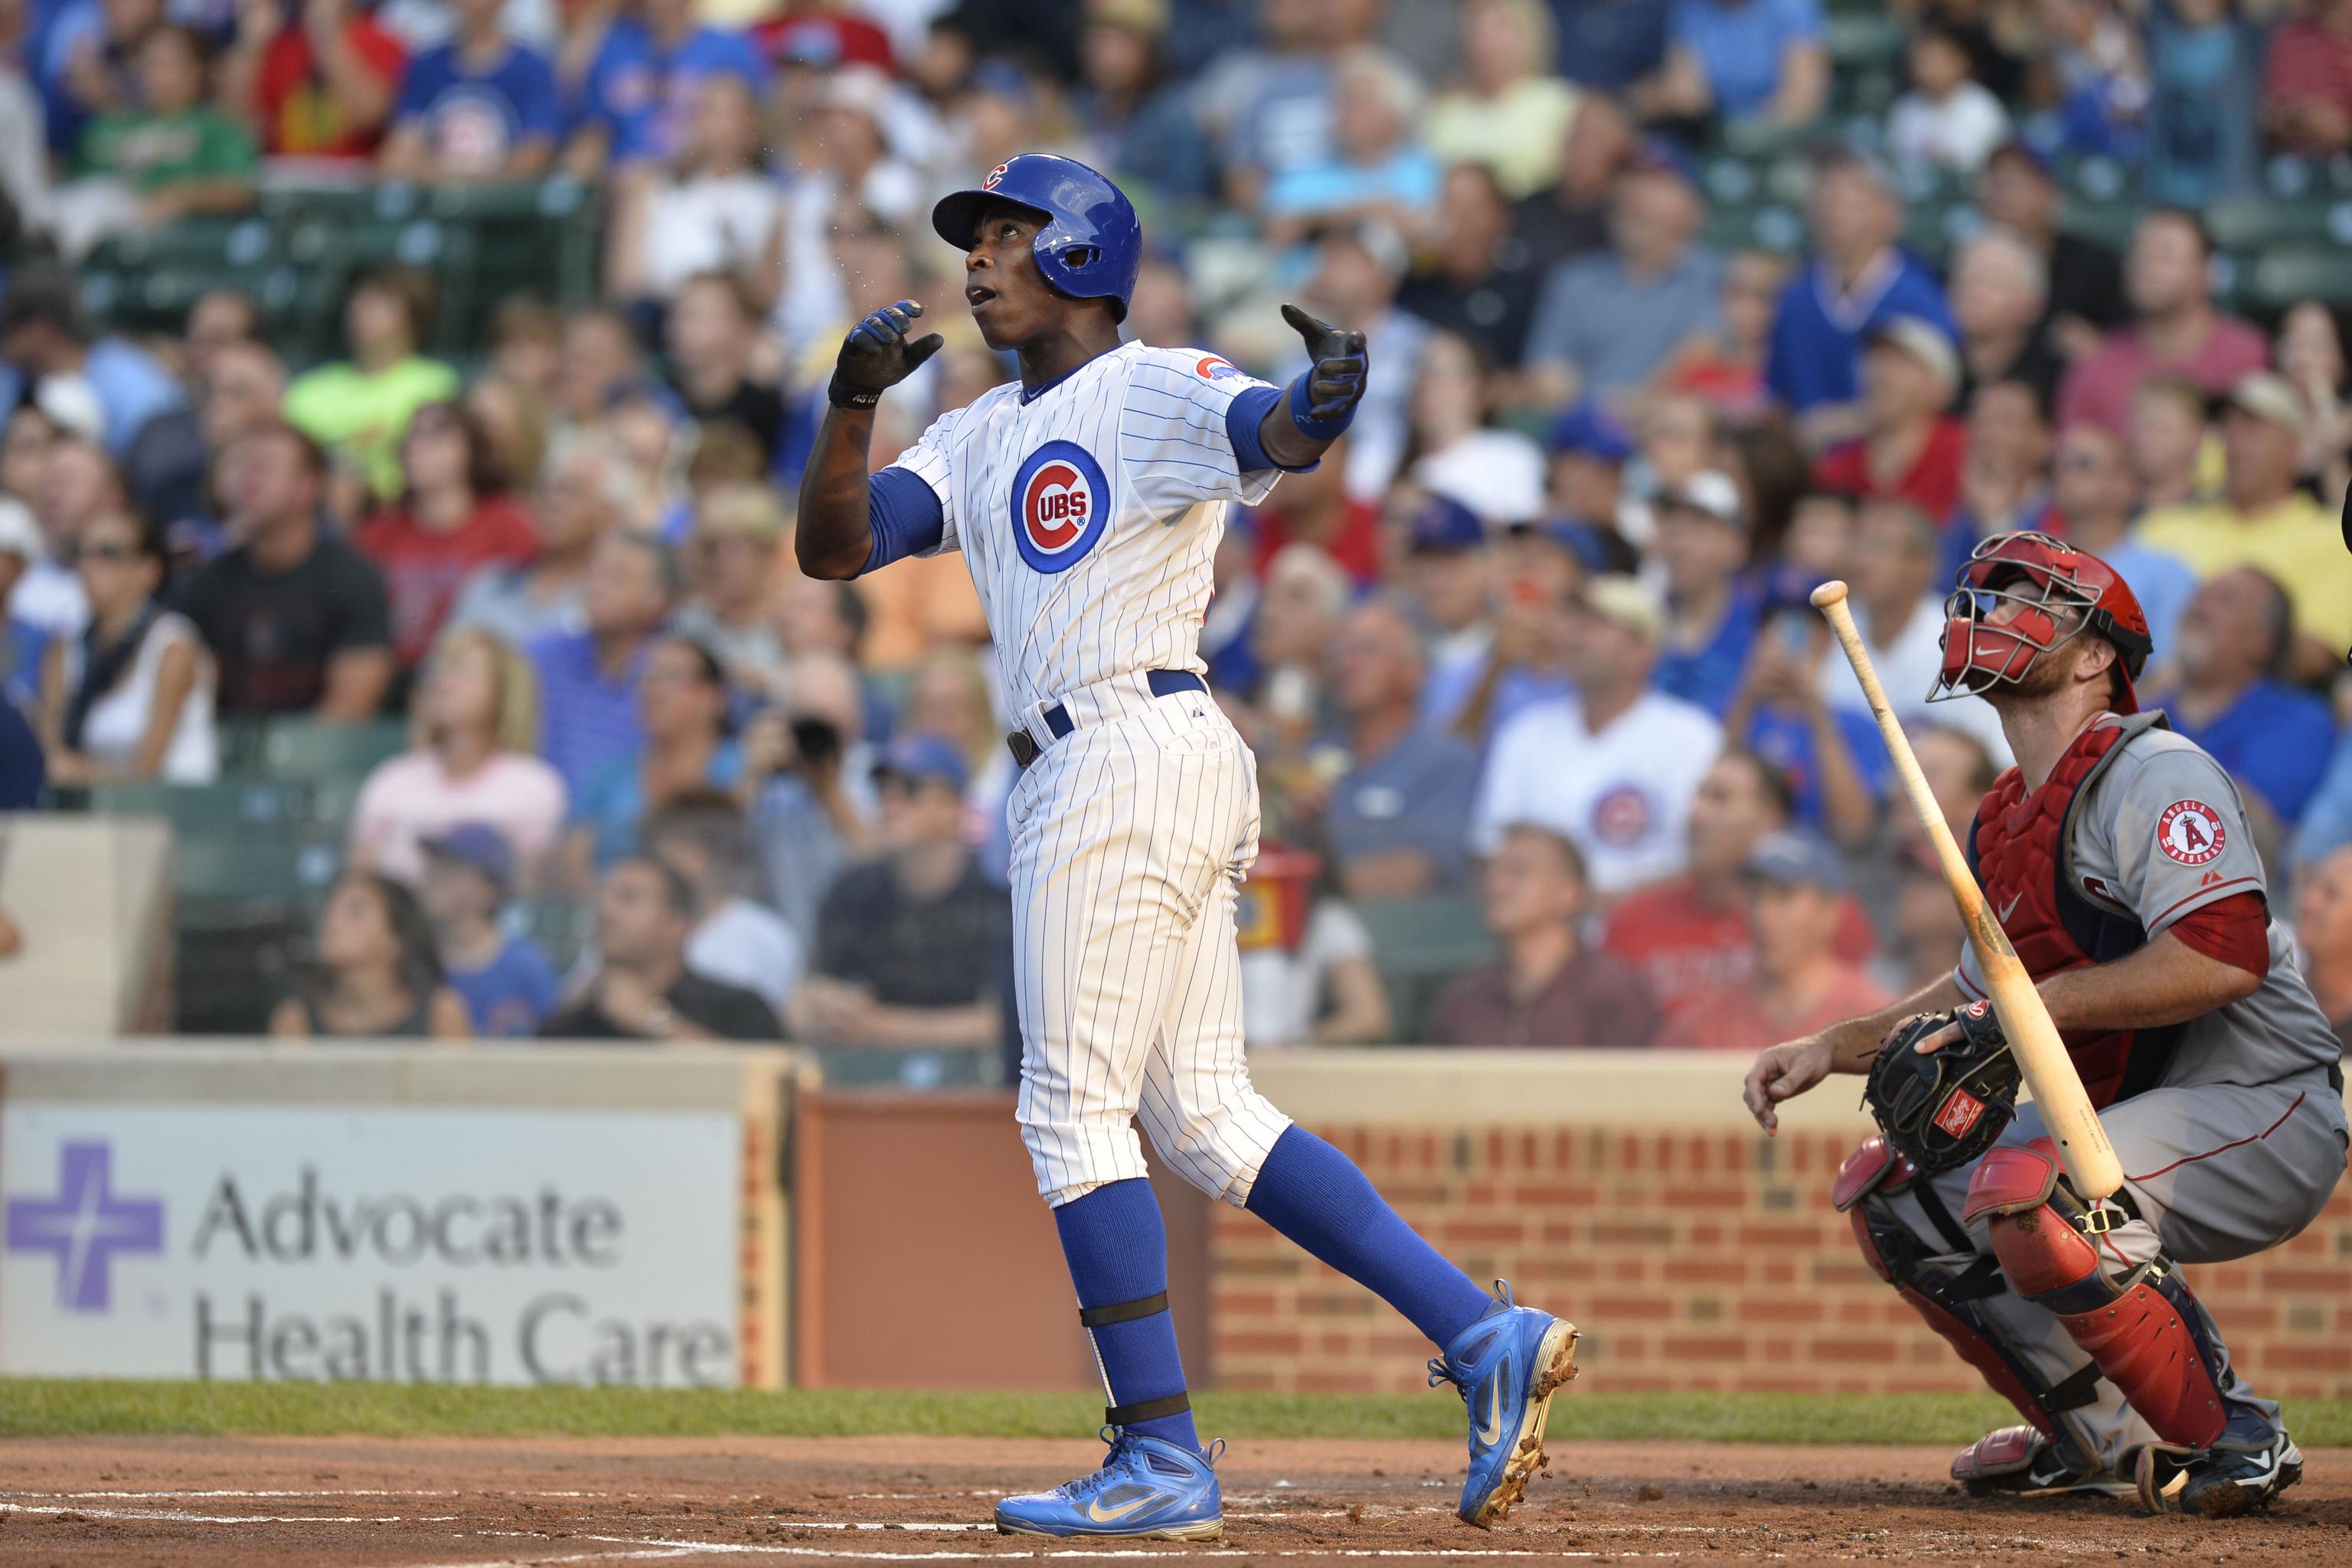 Cubs trade rumors: Alfonso Soriano to Yankees deal getting closer